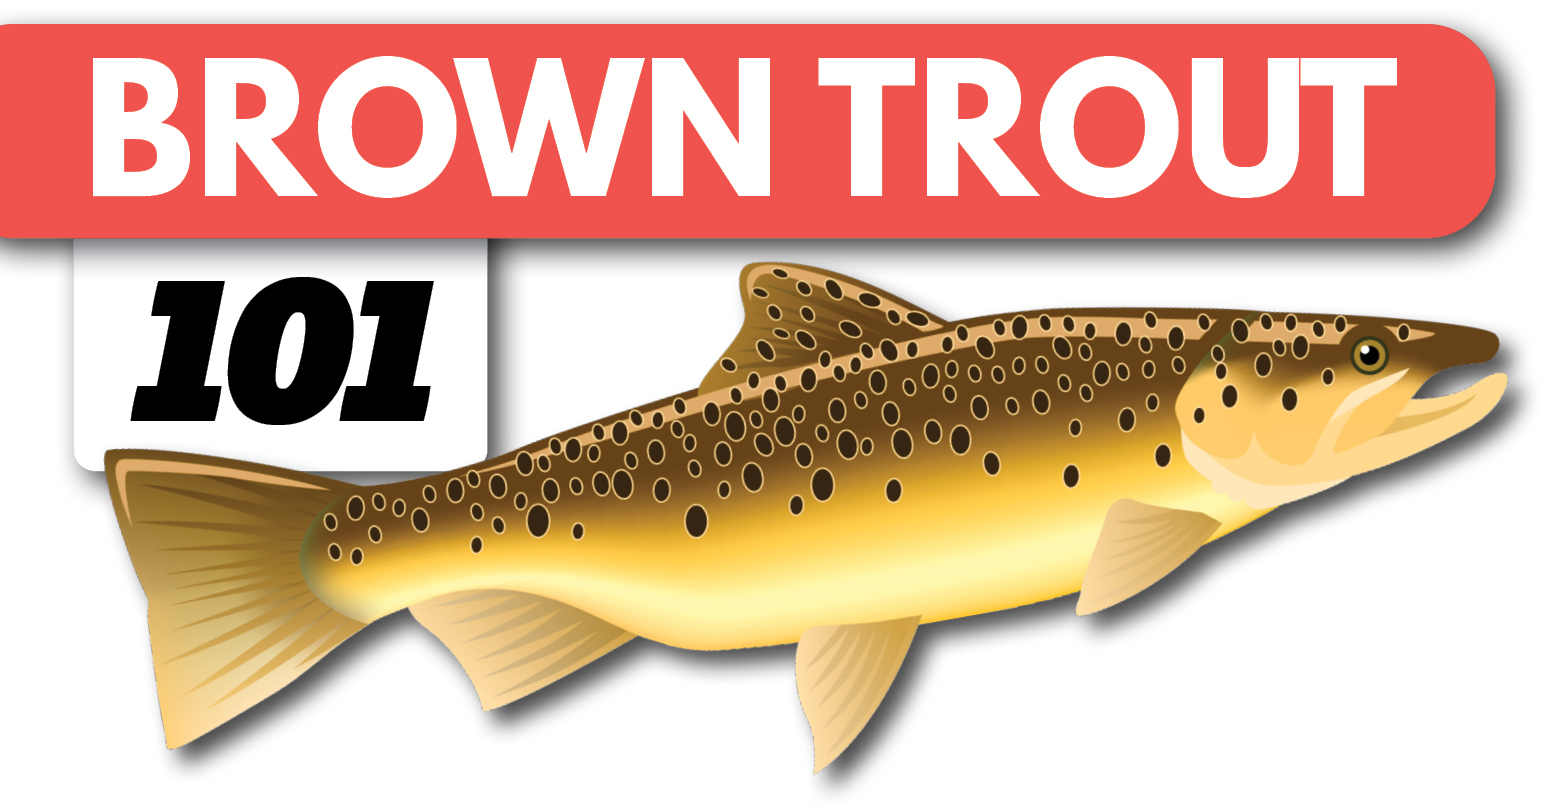 Trout Fishing - Tips for More Fish! - Catch A Guide